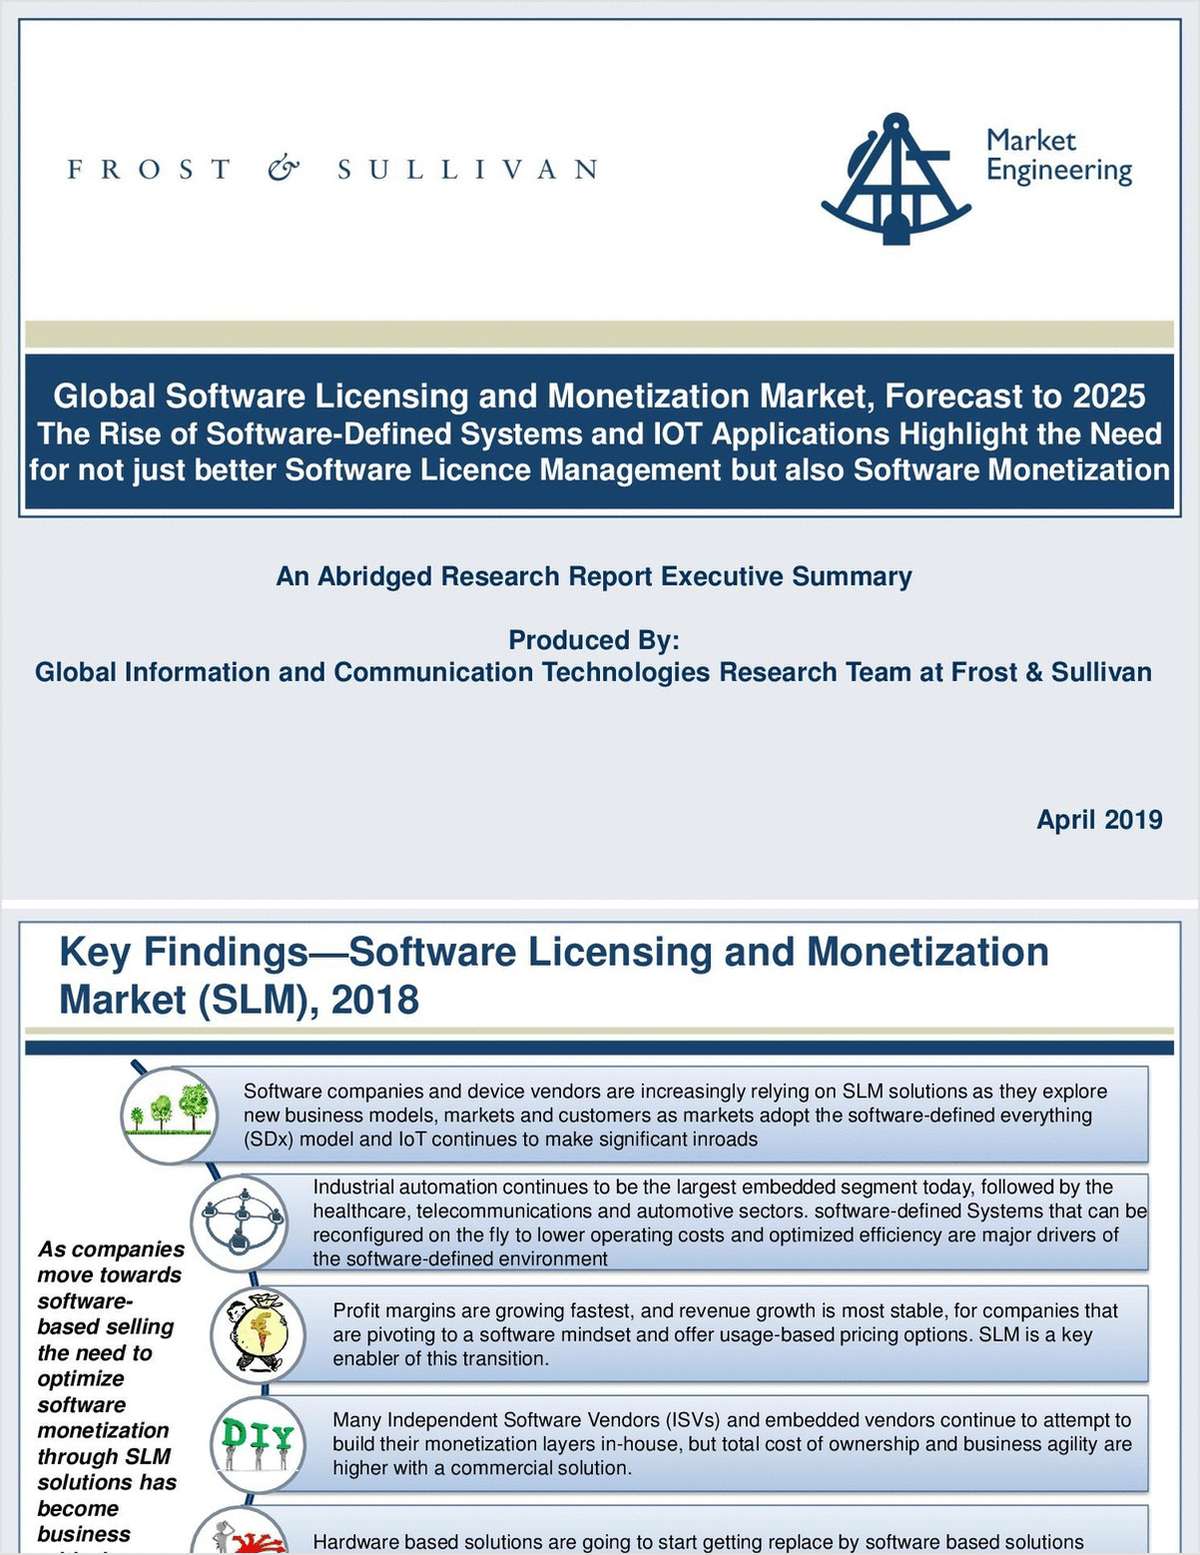 Global Software Licensing and Monetization Market, Forecast to 2025